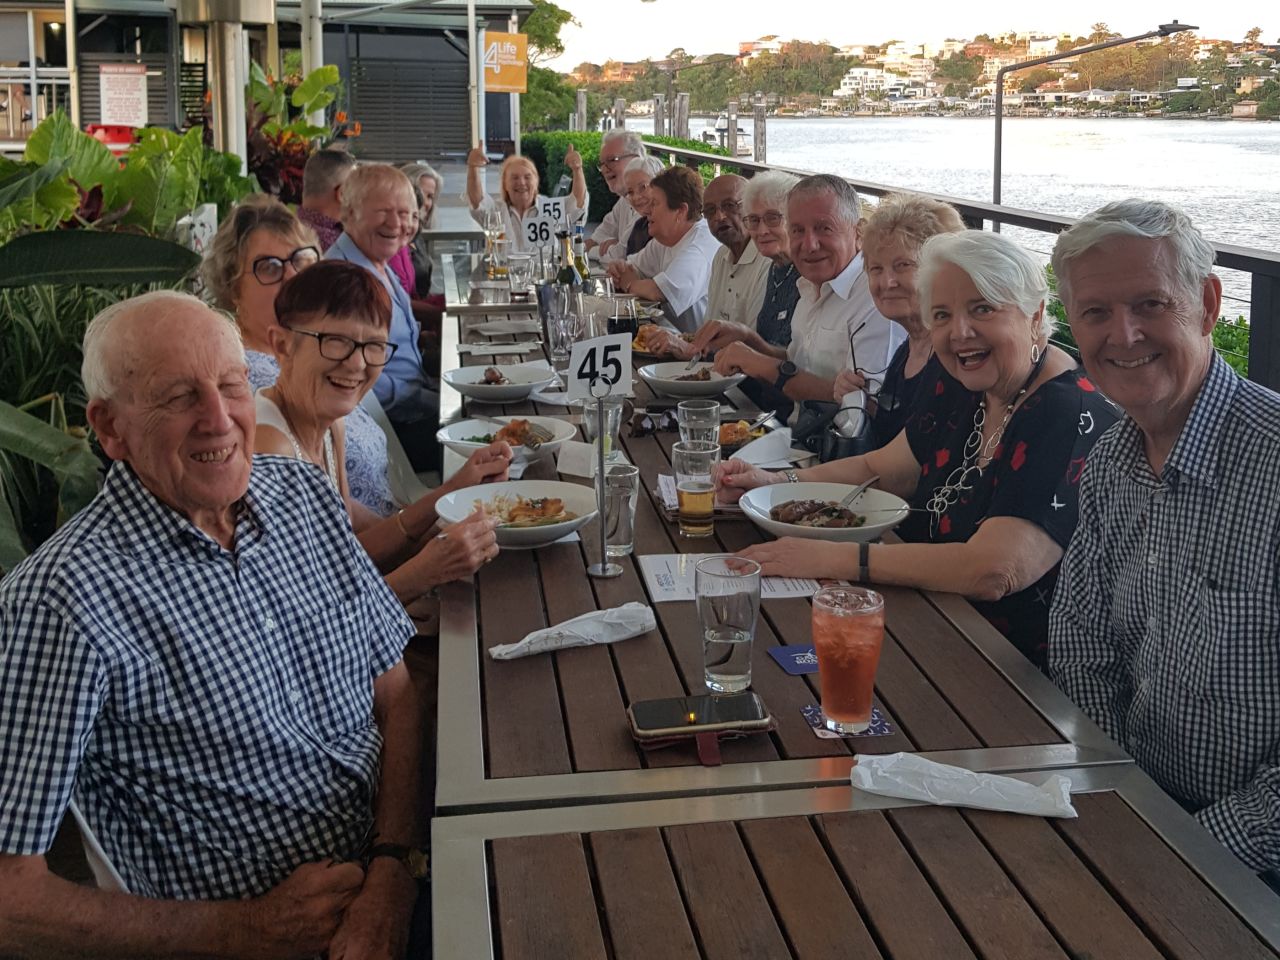 February Dinner 2023 at New Farm Bowls Club on the River.

Old friends and new members. All good company!